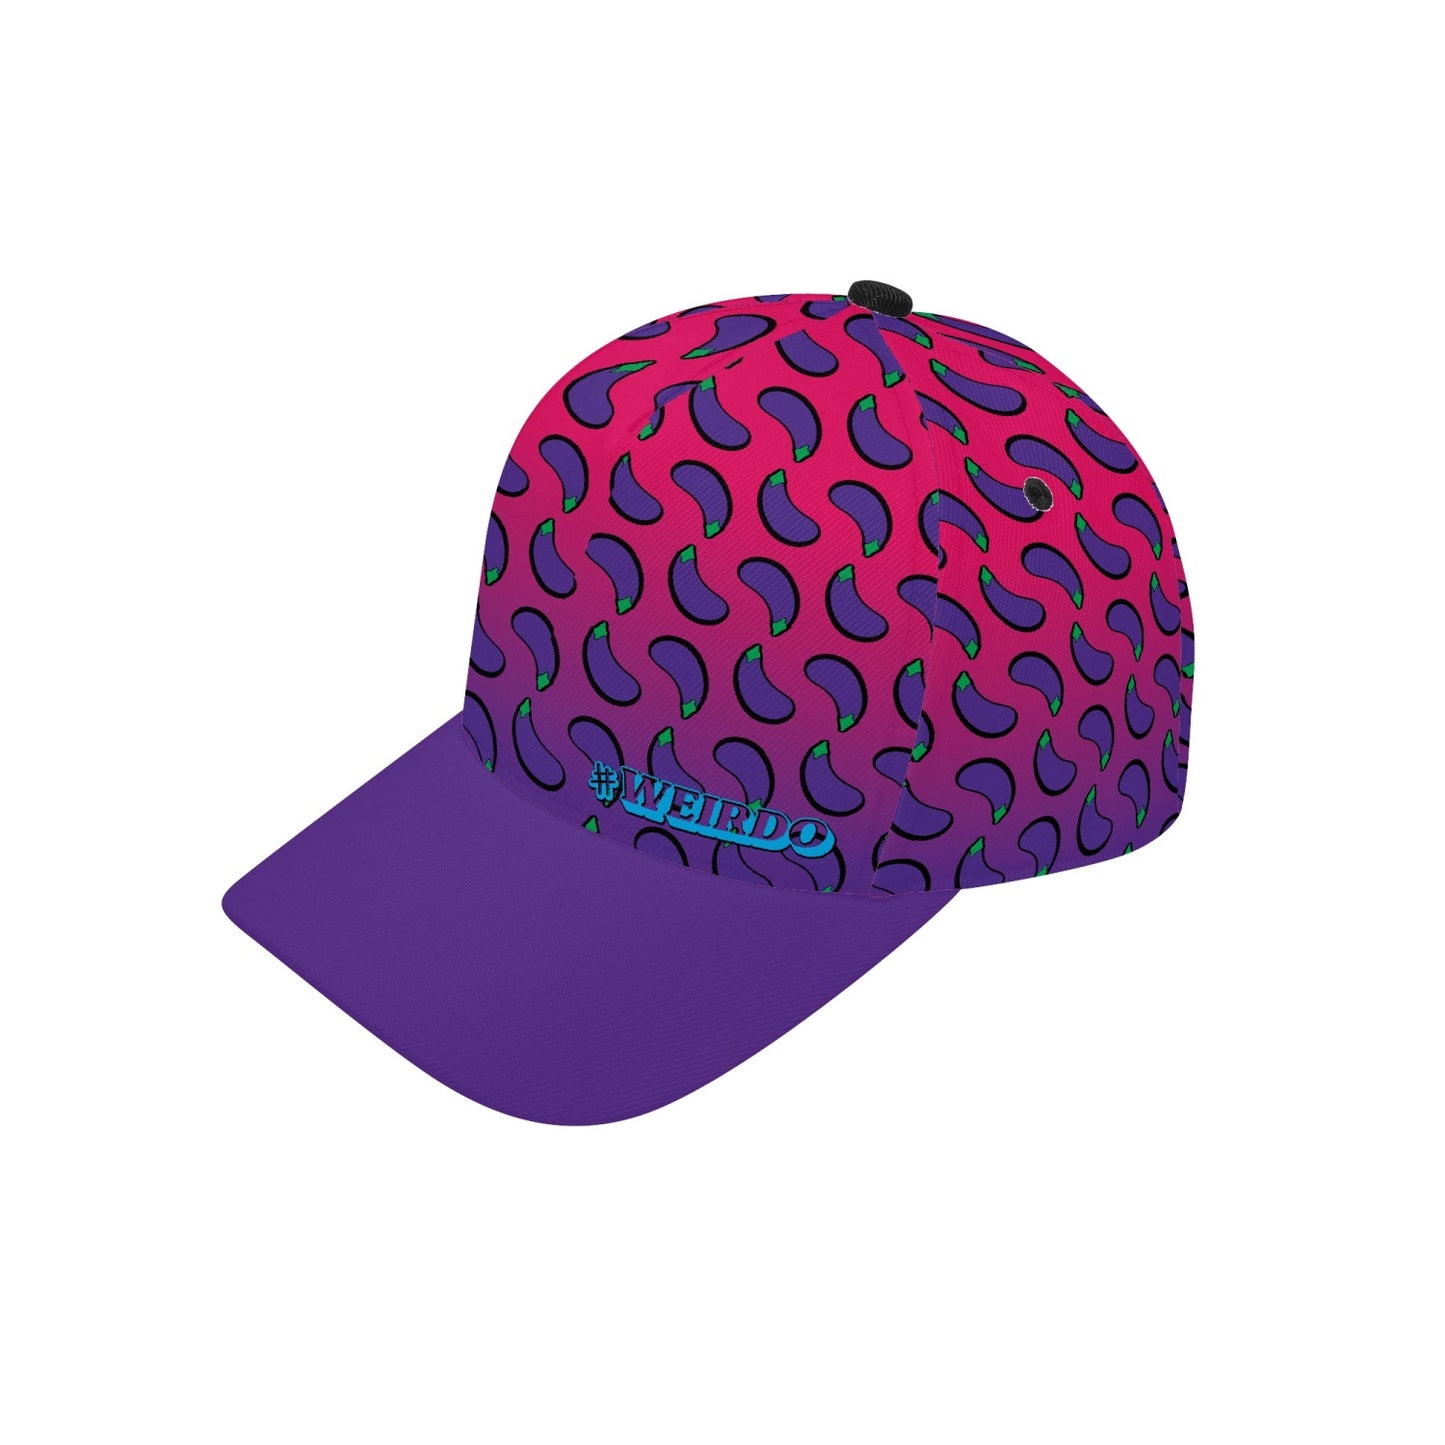 #WEIRDO | Hey Weirdo, how do you like this baseball cap? Pink and purple cap with 'eggplant' pattern and fun meme at the front.